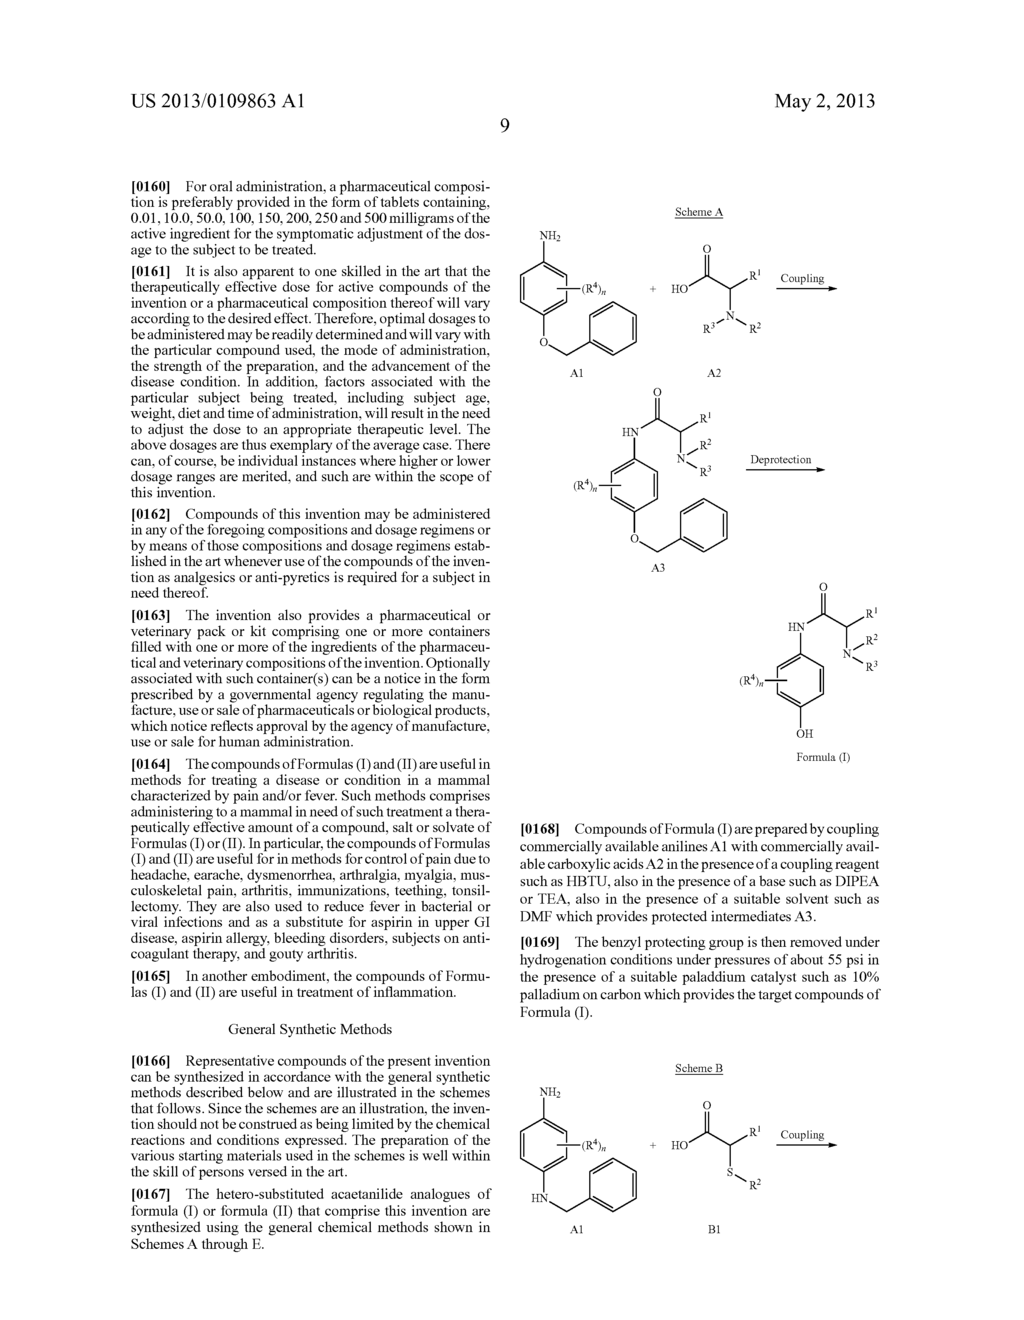 HETERO-SUBSTITUTED ACETANILIDE DERIVATIVES AS ANALGESIC AGENTS - diagram, schematic, and image 10